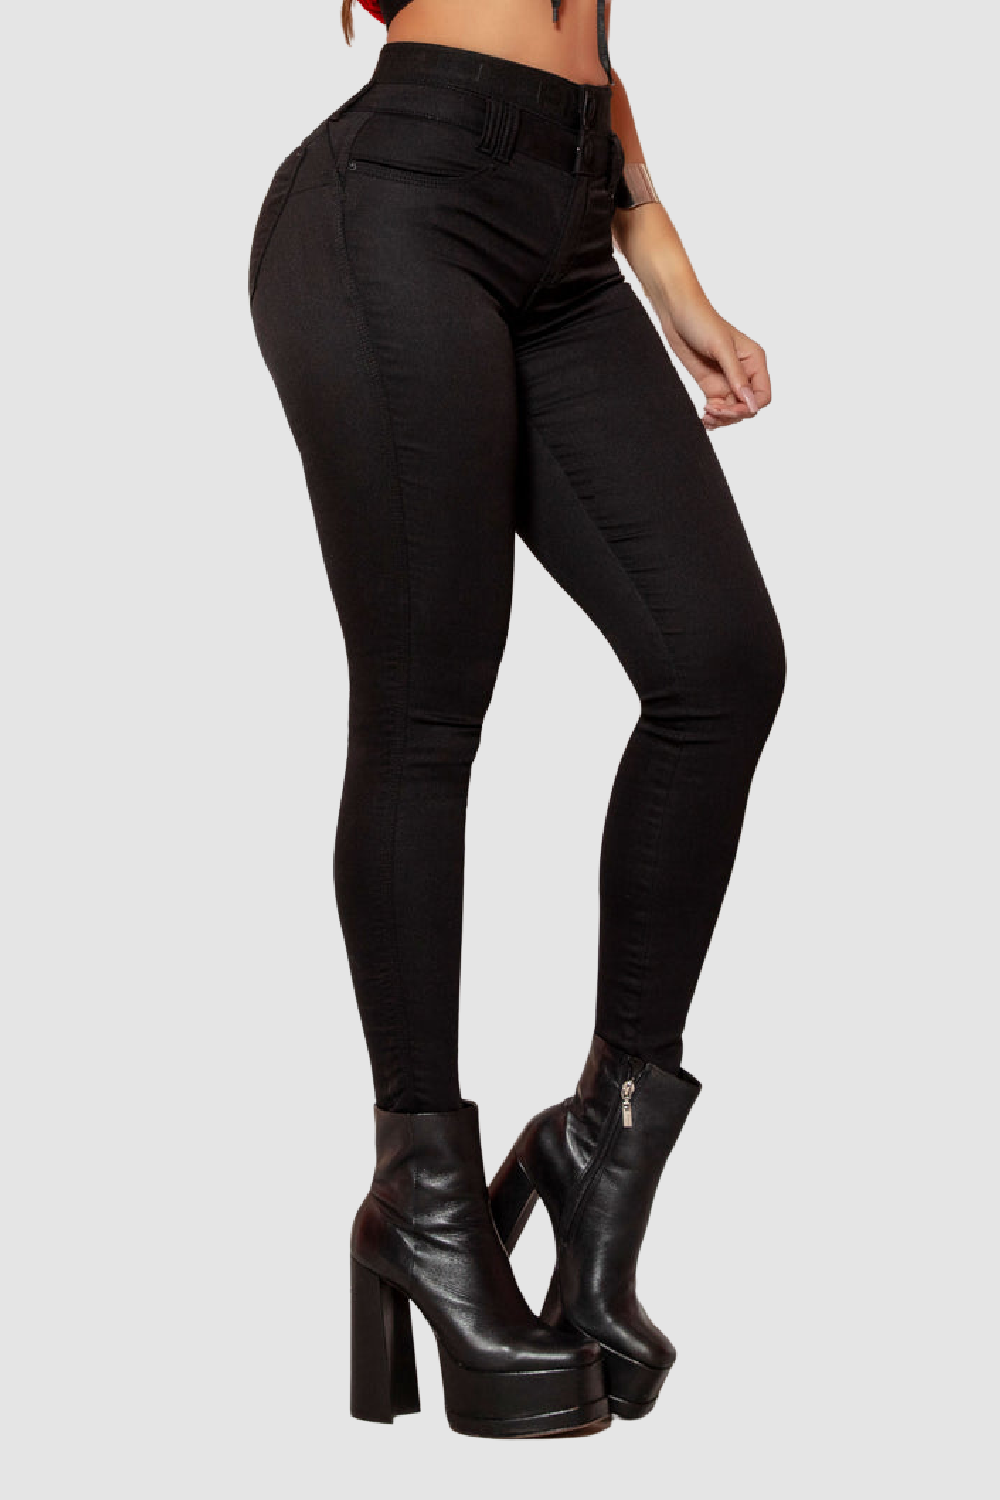 PIT BULL JEANS Black Shaping Jeans